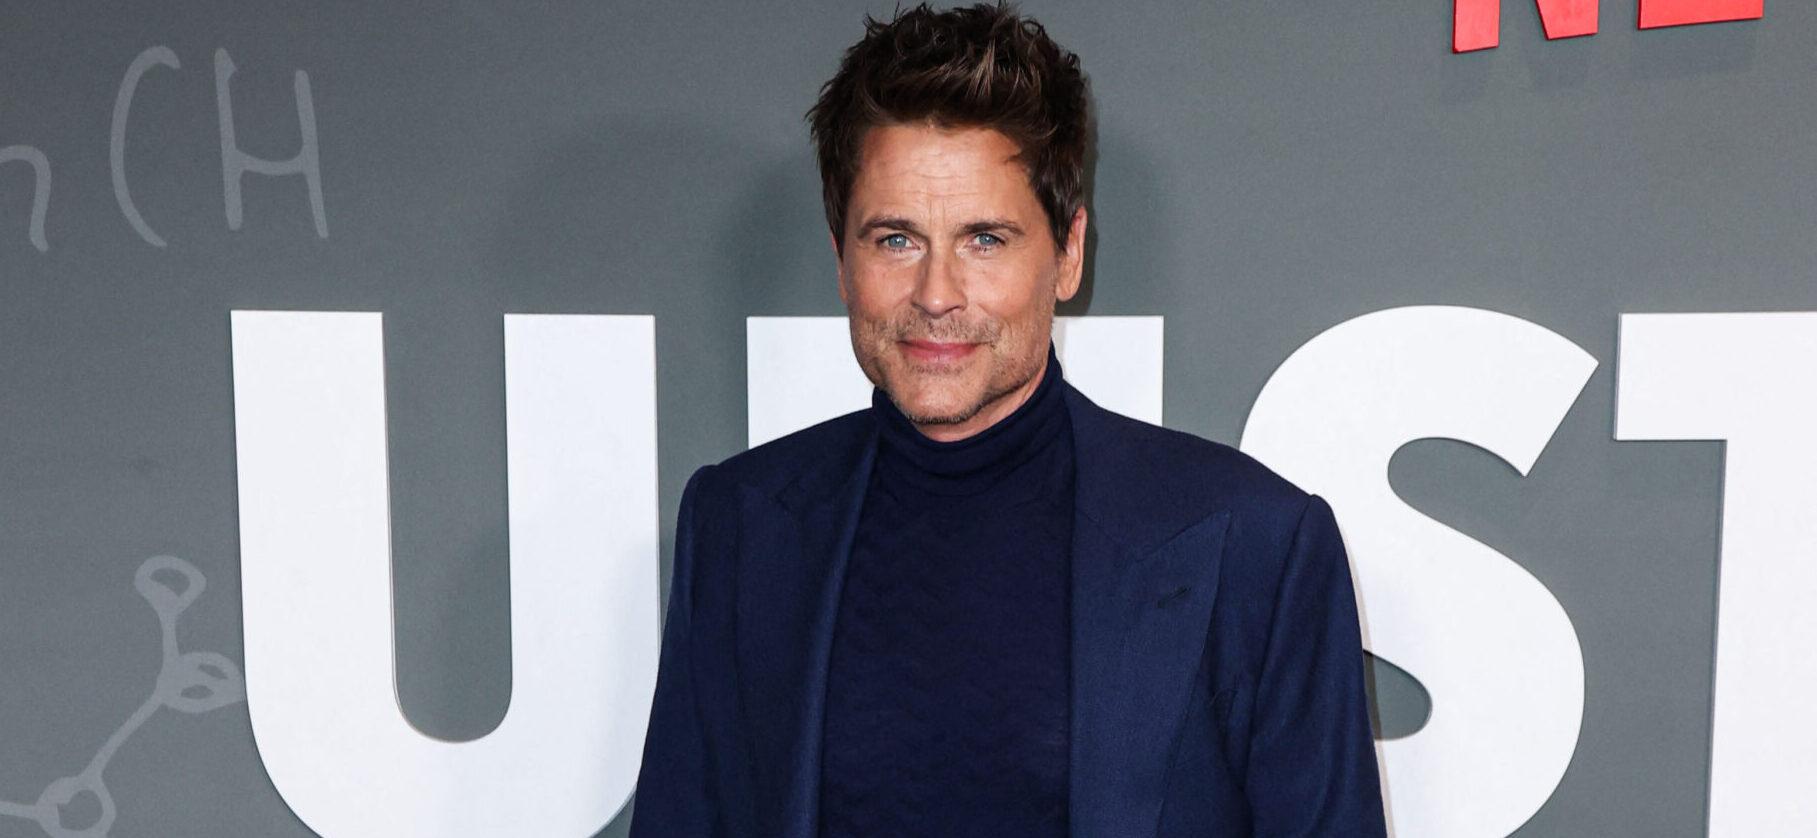 Rob Lowe Sued By Former Employee For Wrongful Termination & Discrimination